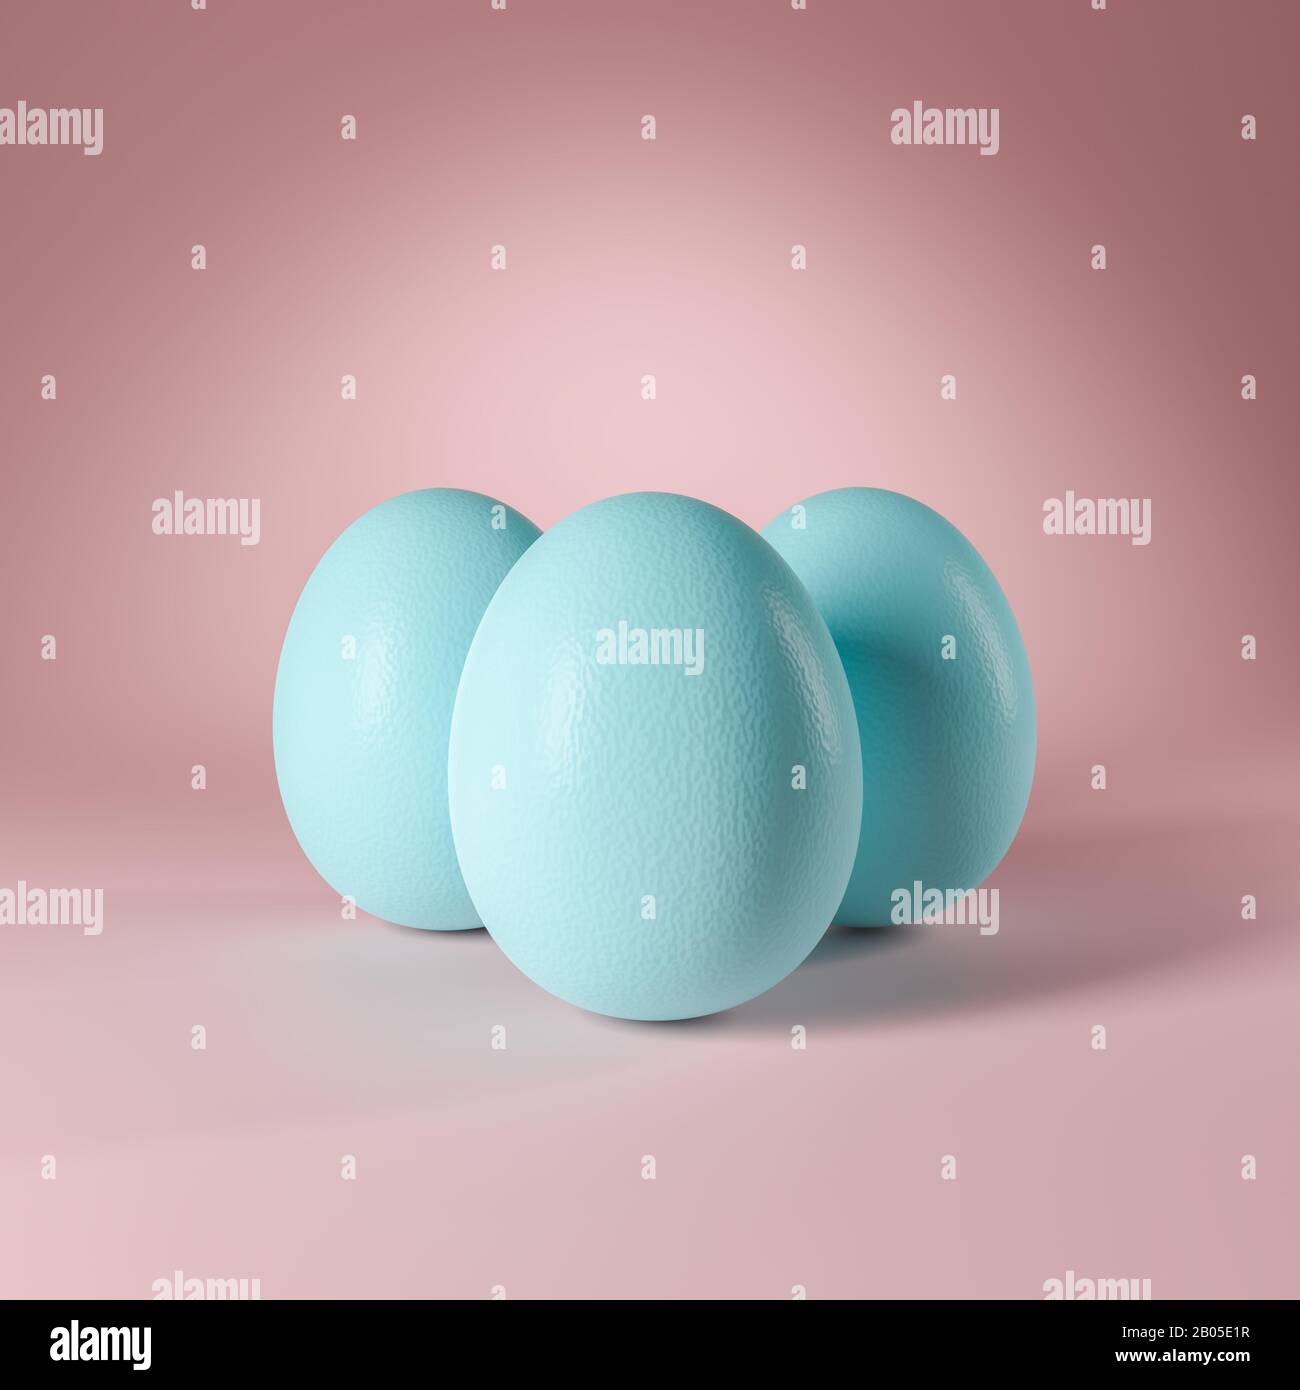 Three pastel turquoise colored easter eggs standing on a seamless pastel rose background. Copy space available. Stock Photo